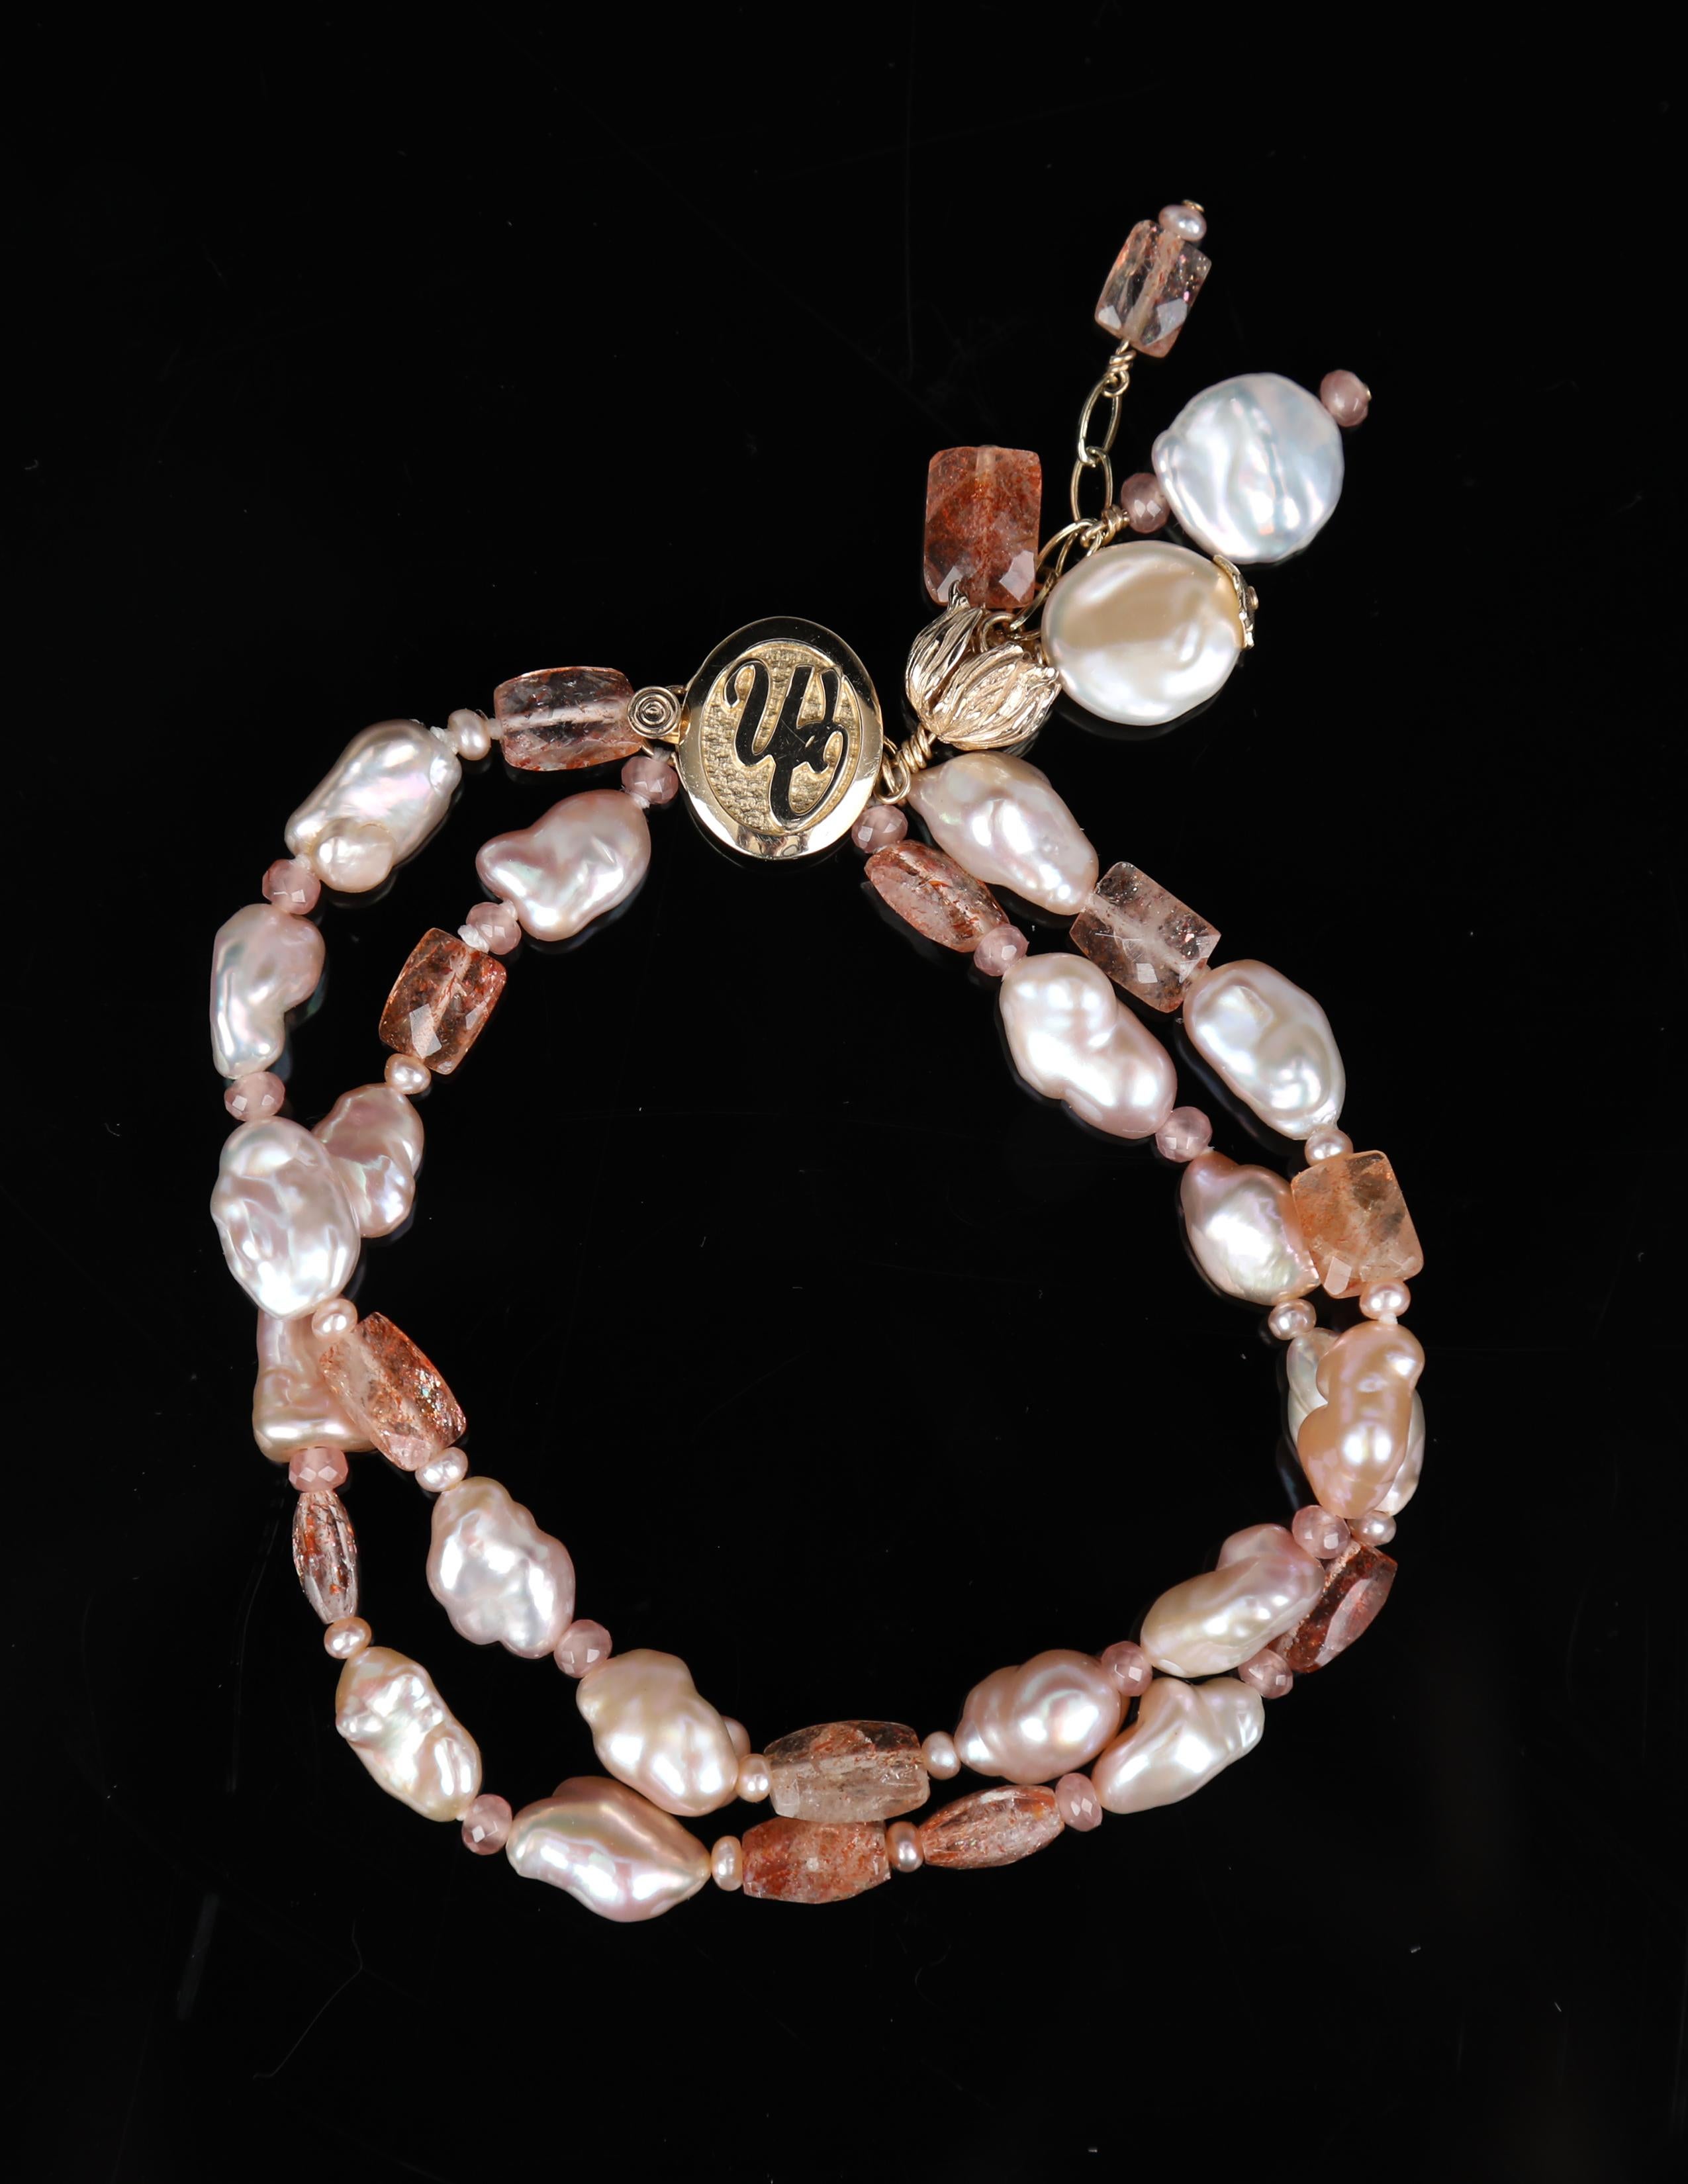 A pearl, rhodochrosite, sunstone, and gold bracelet encourages expressions of joy.  